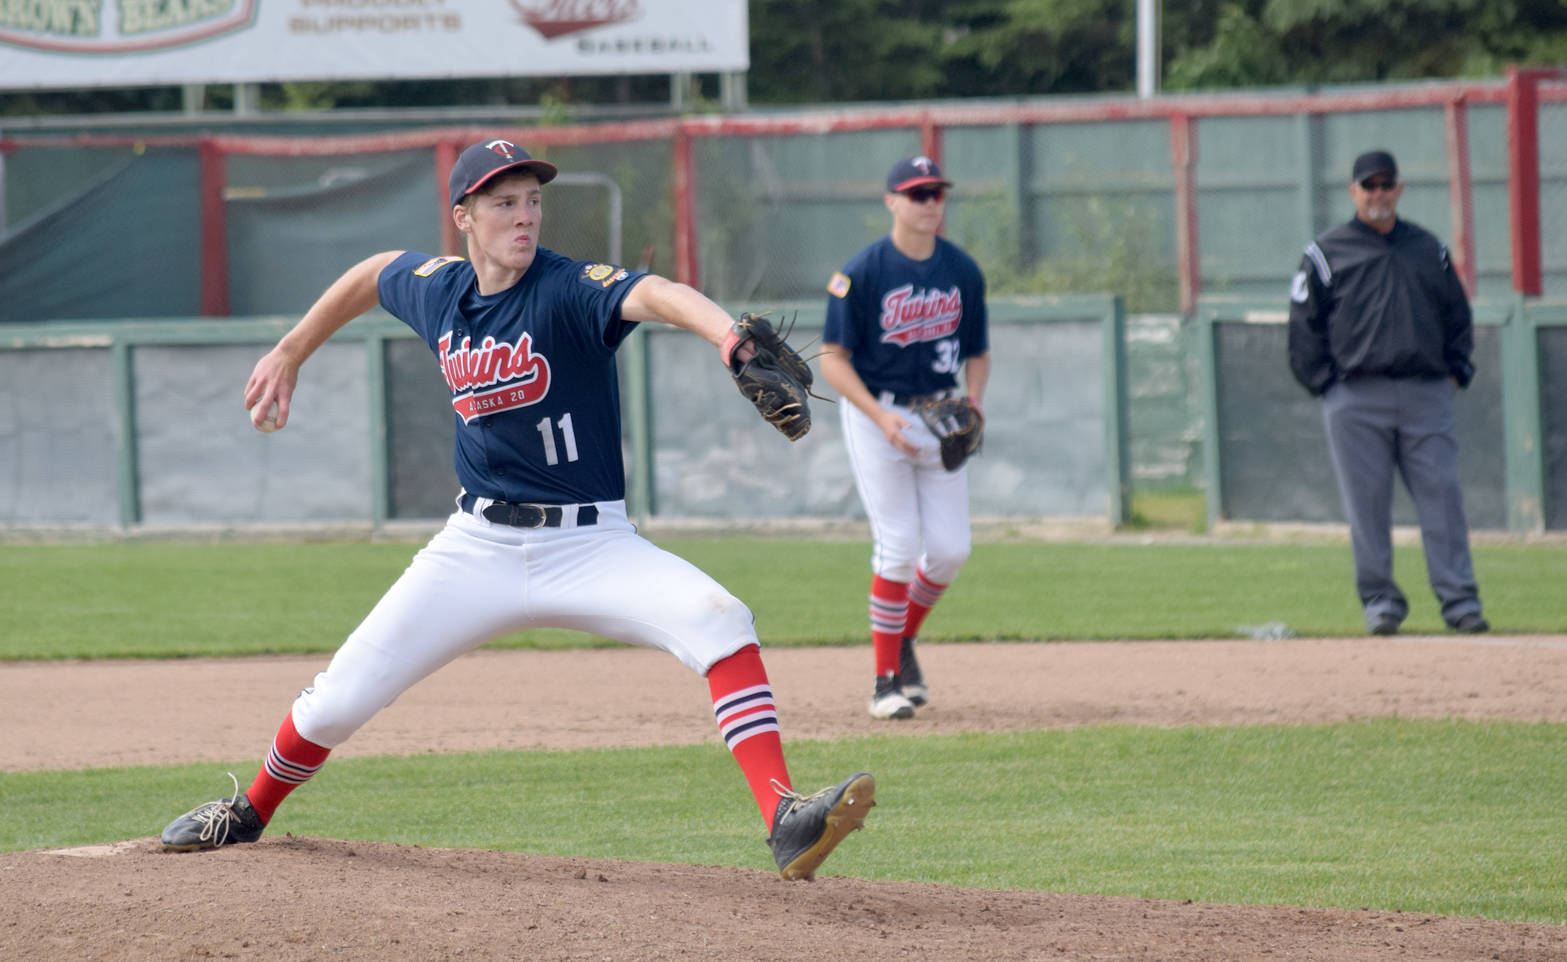 Twins starter Cody Quelland delivers to Kodiak in his final start at Coral Seymour Memorial Park in Kenai on Monday, June 25, 2018. (Photo by Jeff Helminiak/Peninsula Clarion)